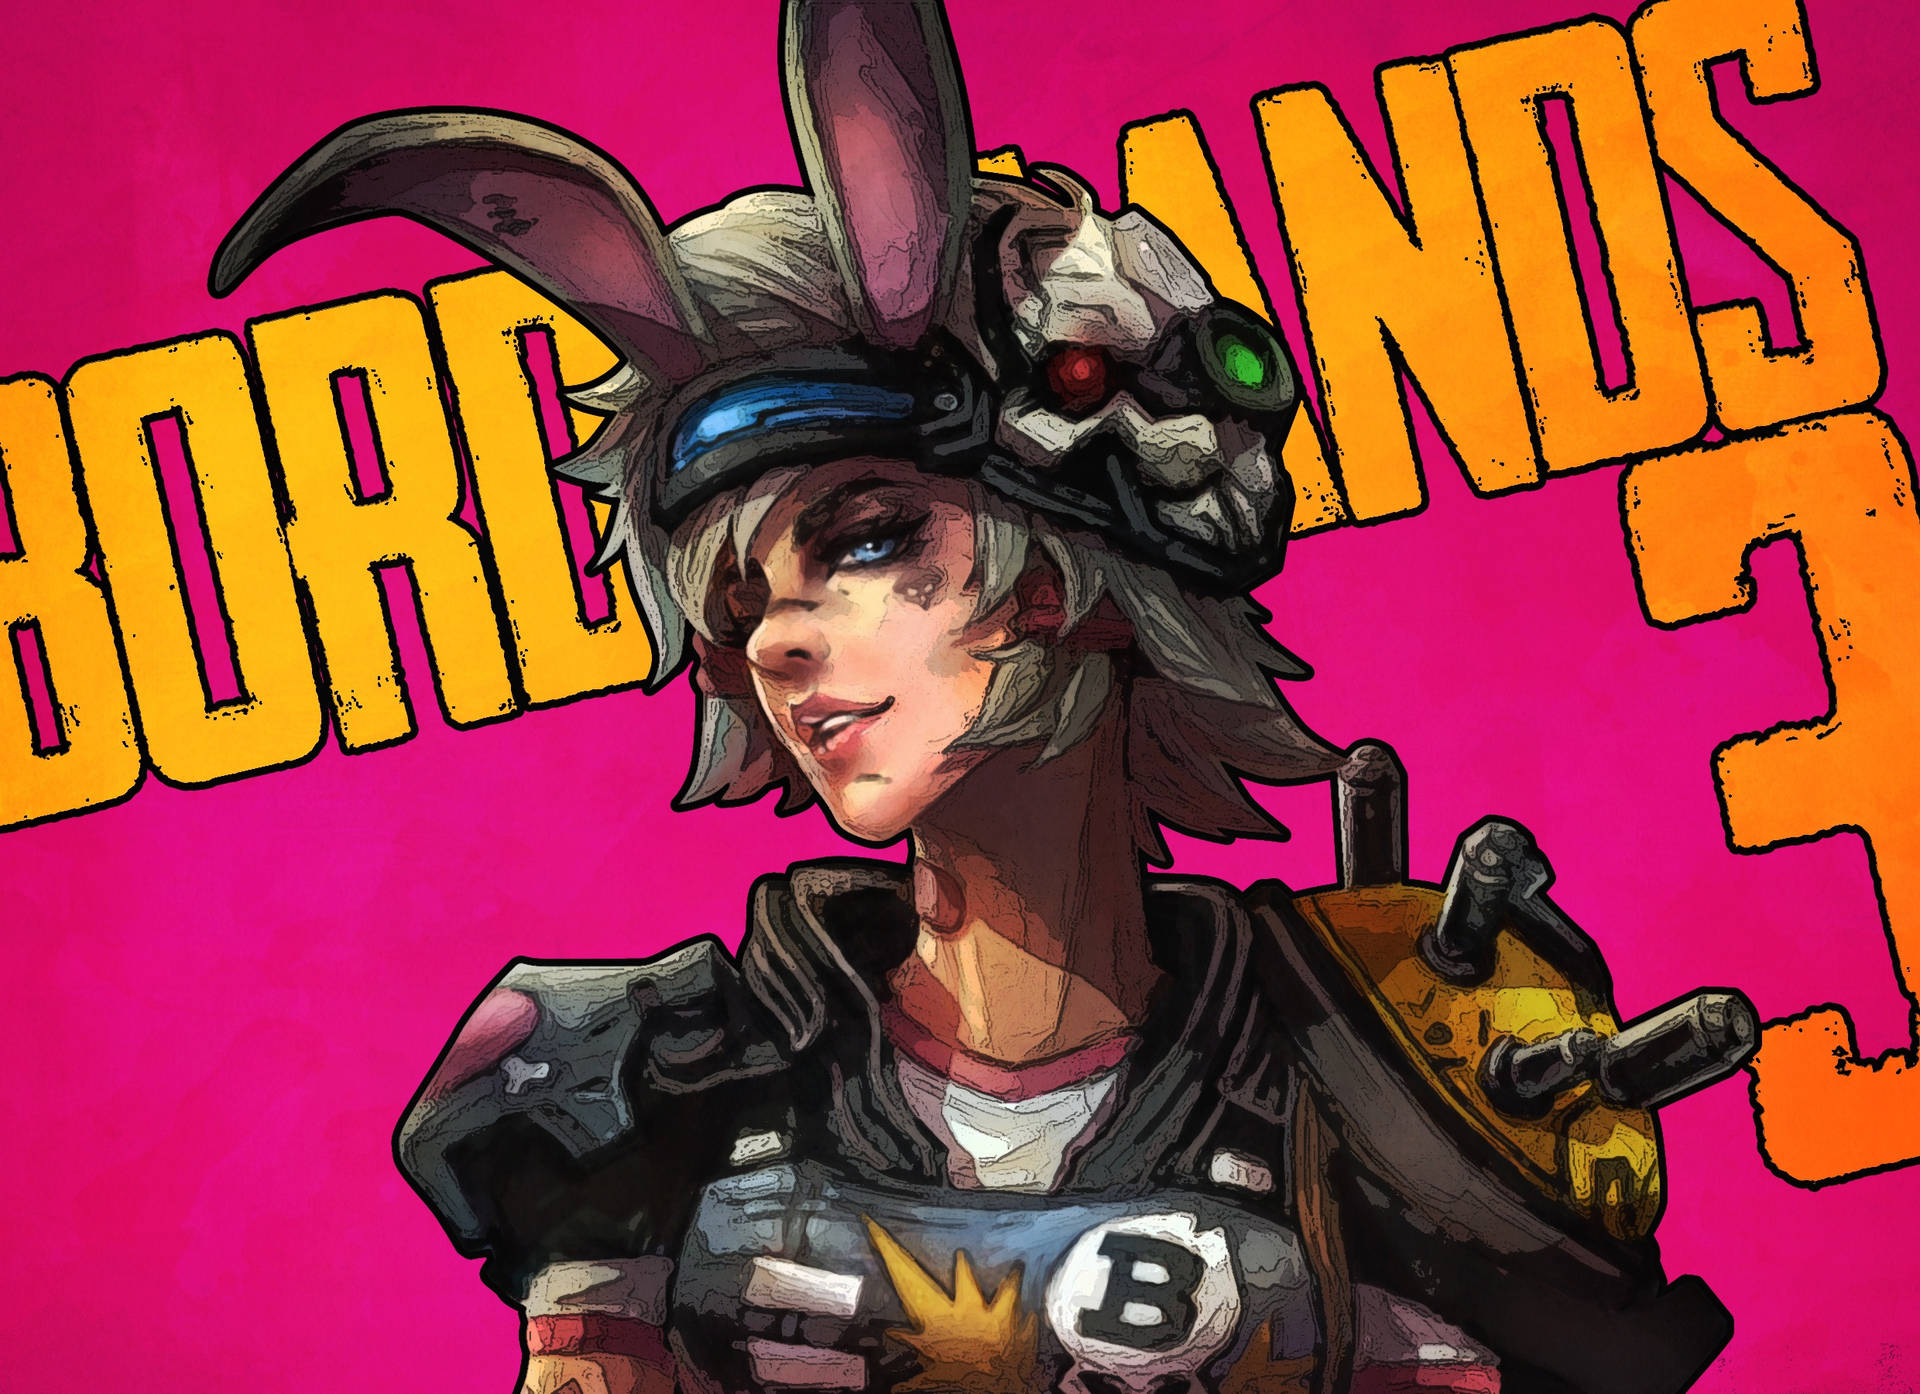 2480X1800 Borderlands 3 Wallpaper and Background